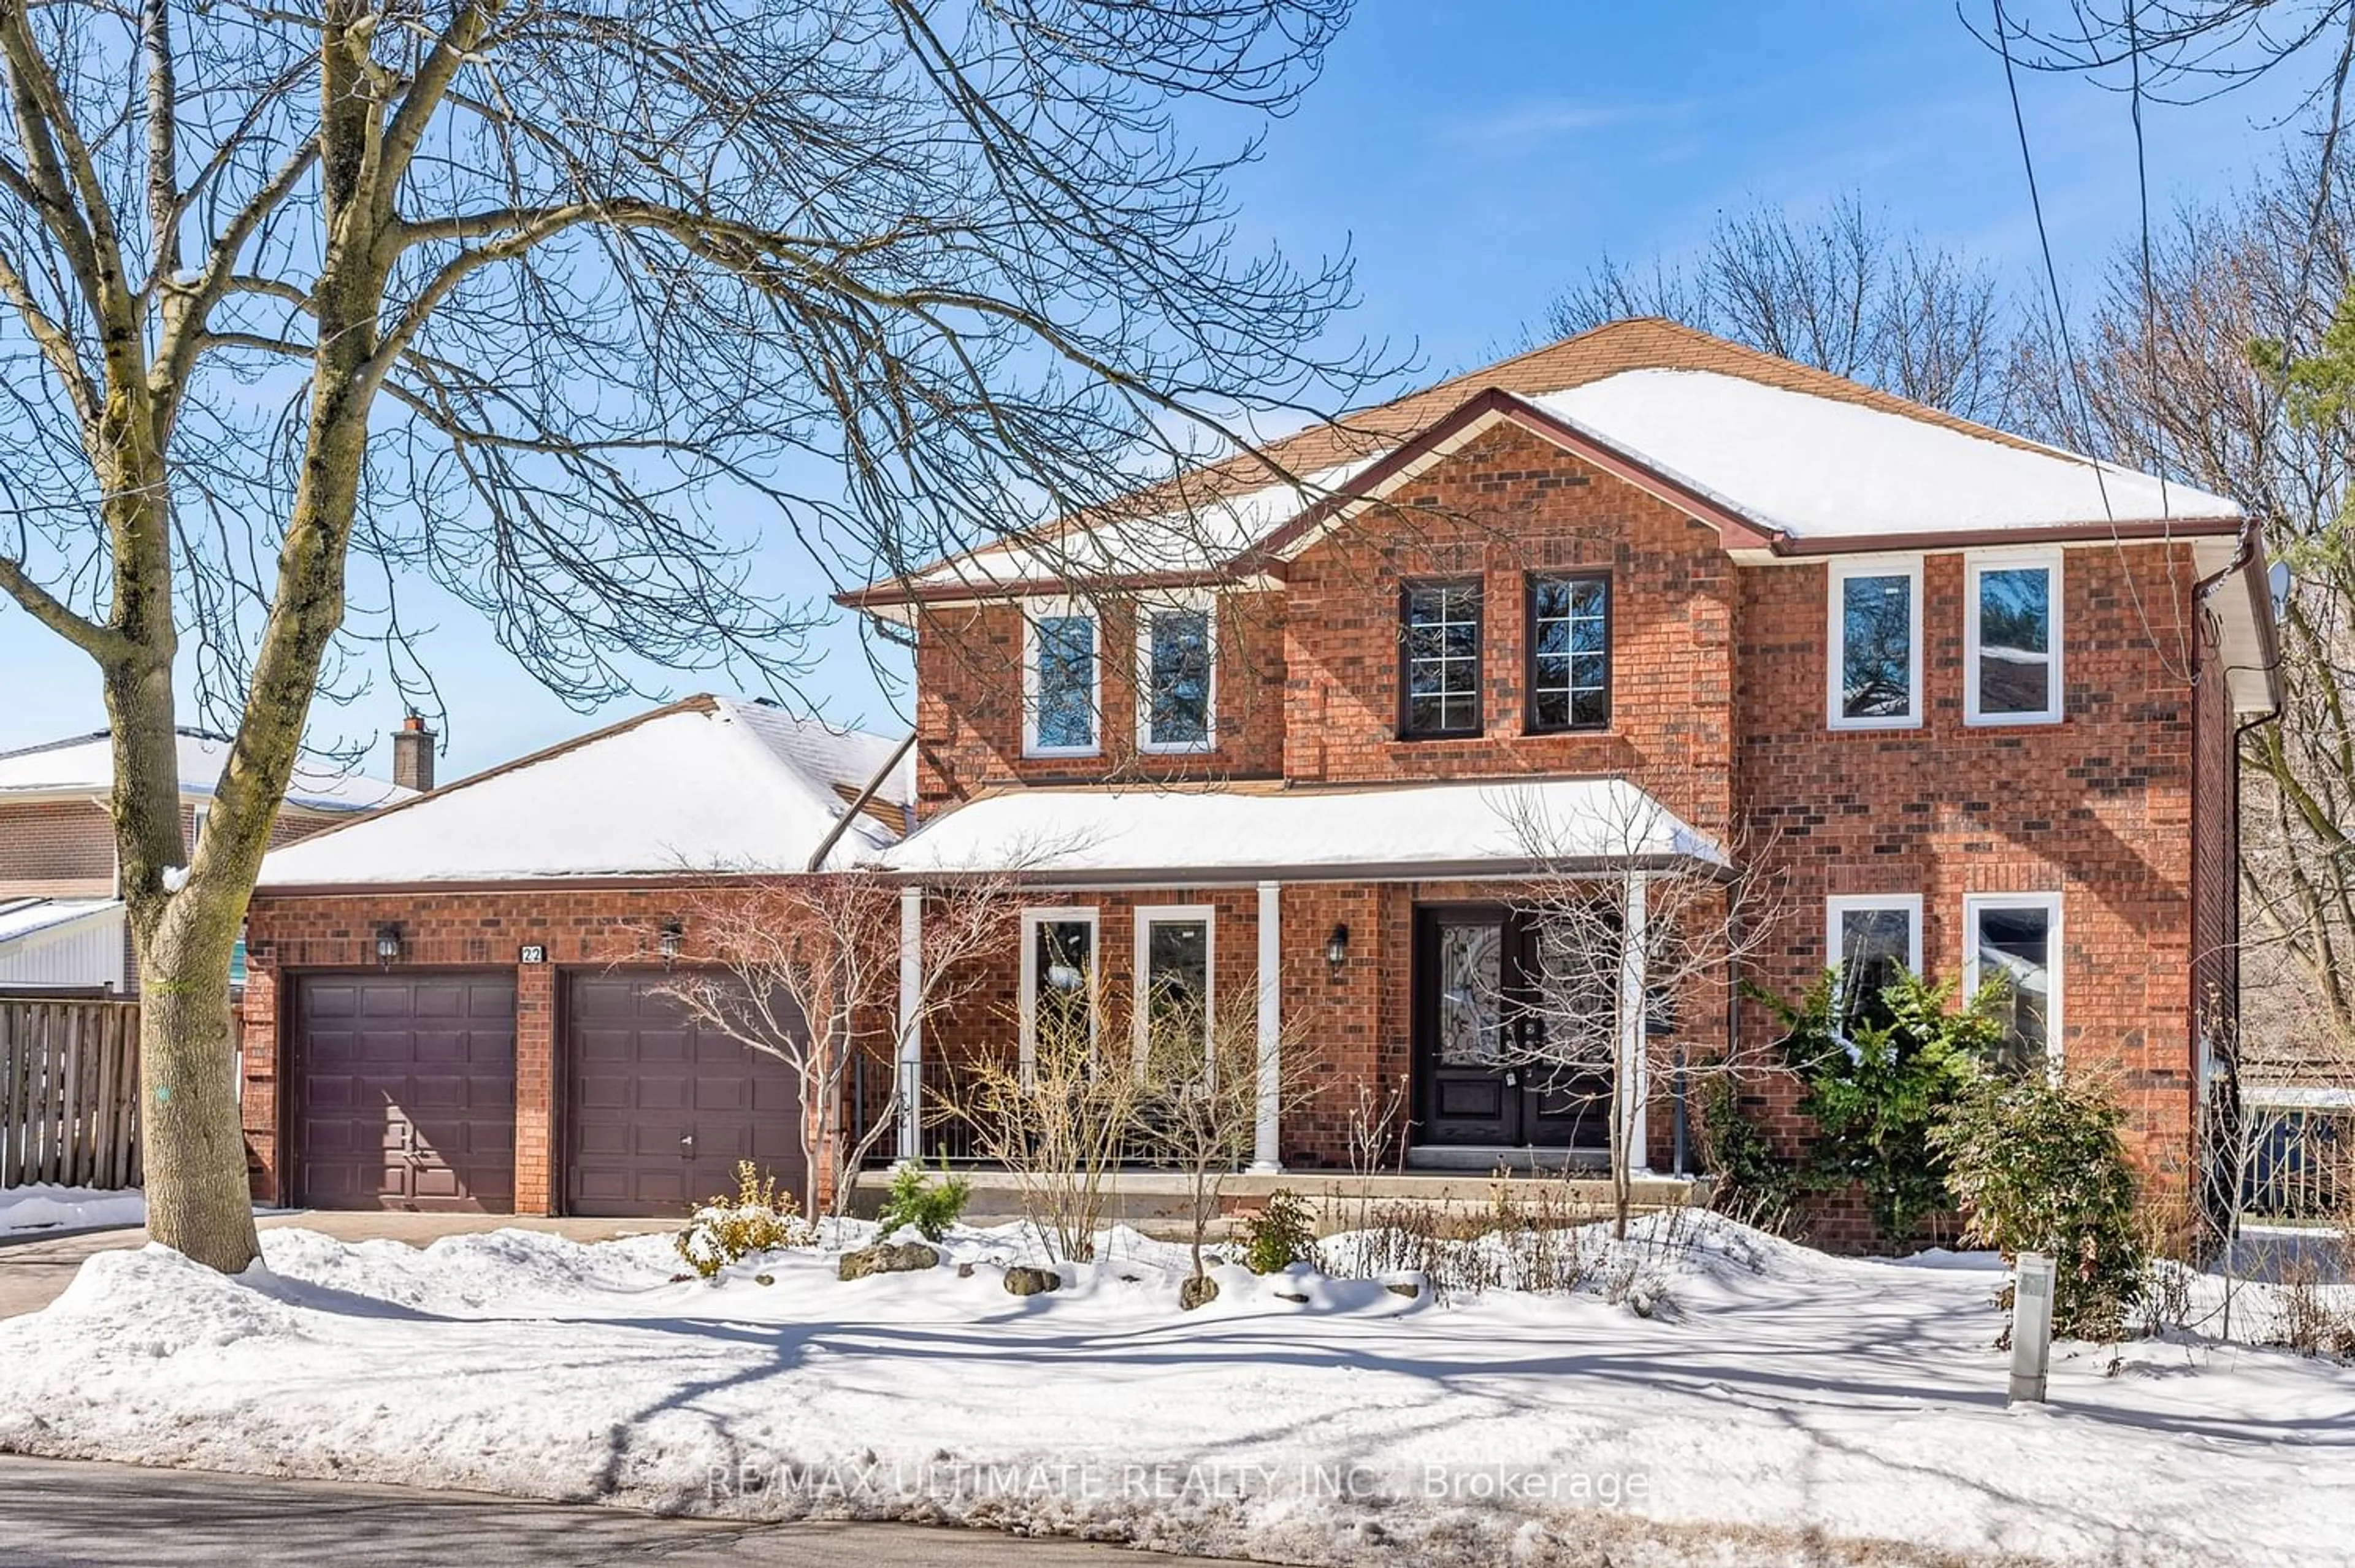 Home with brick exterior material for 22 Chelmsford Ave, Toronto Ontario M2R 3W6